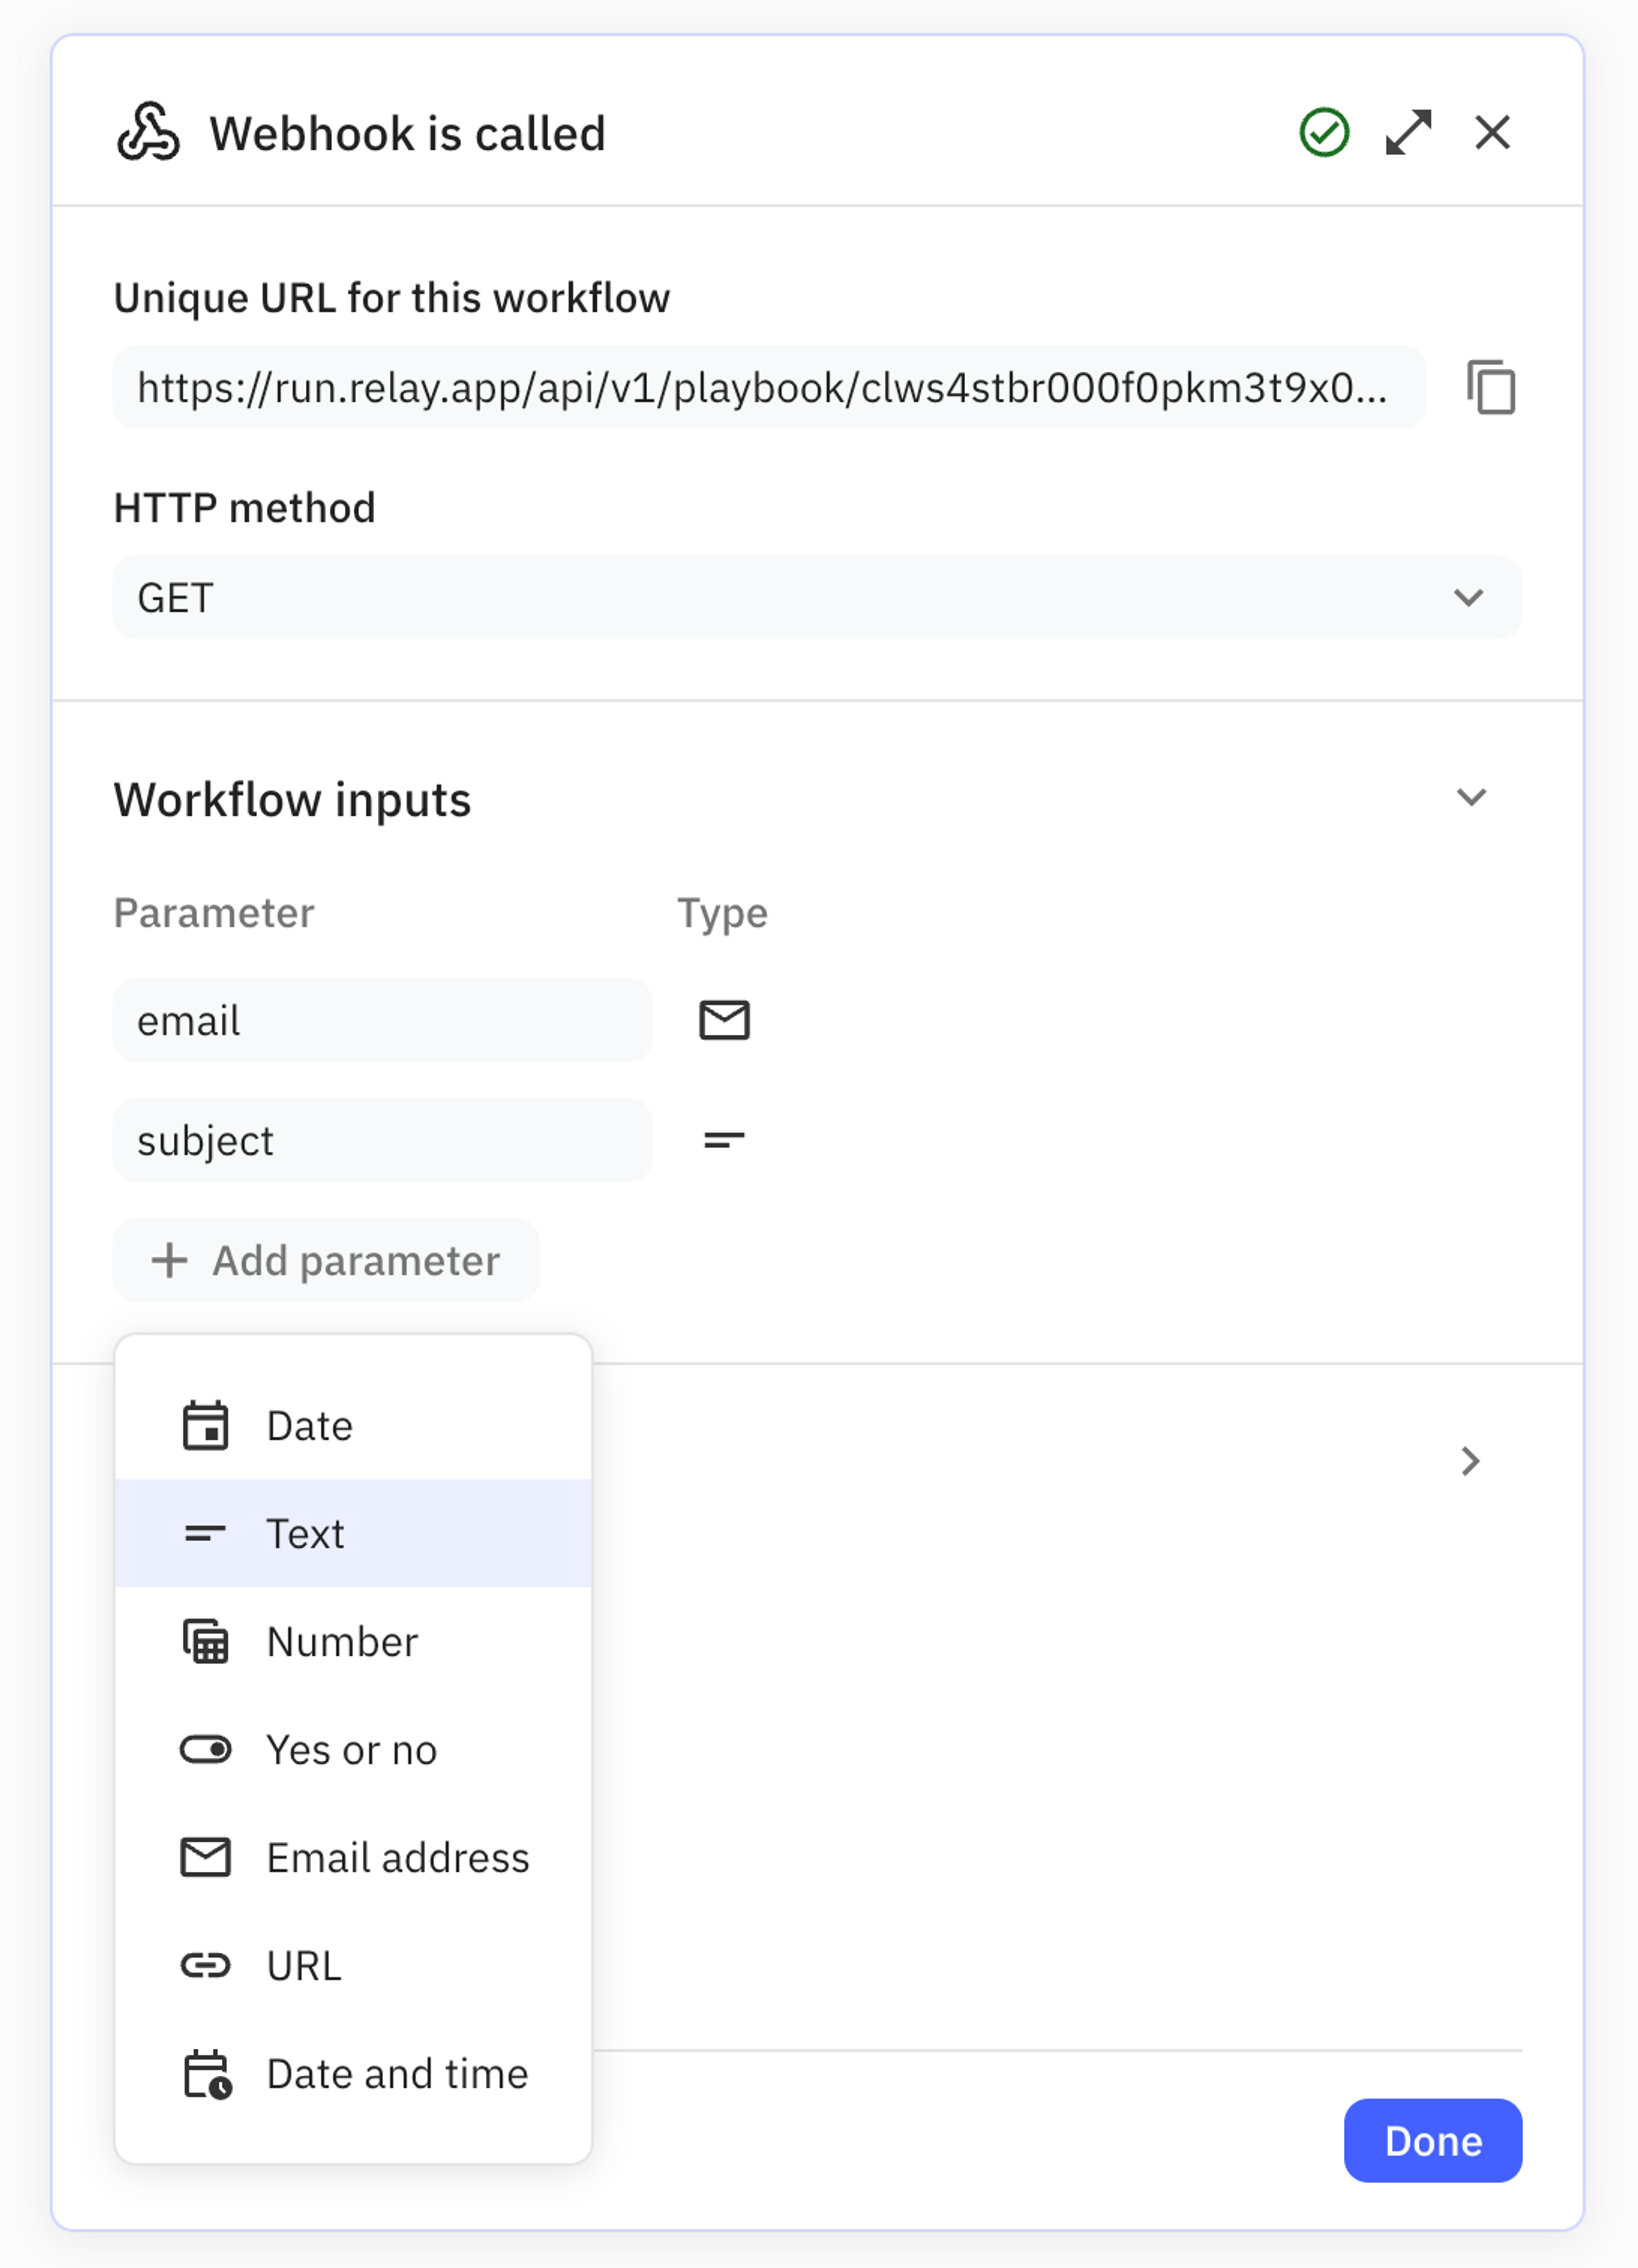 Manually specify the URL parameters for a GET request